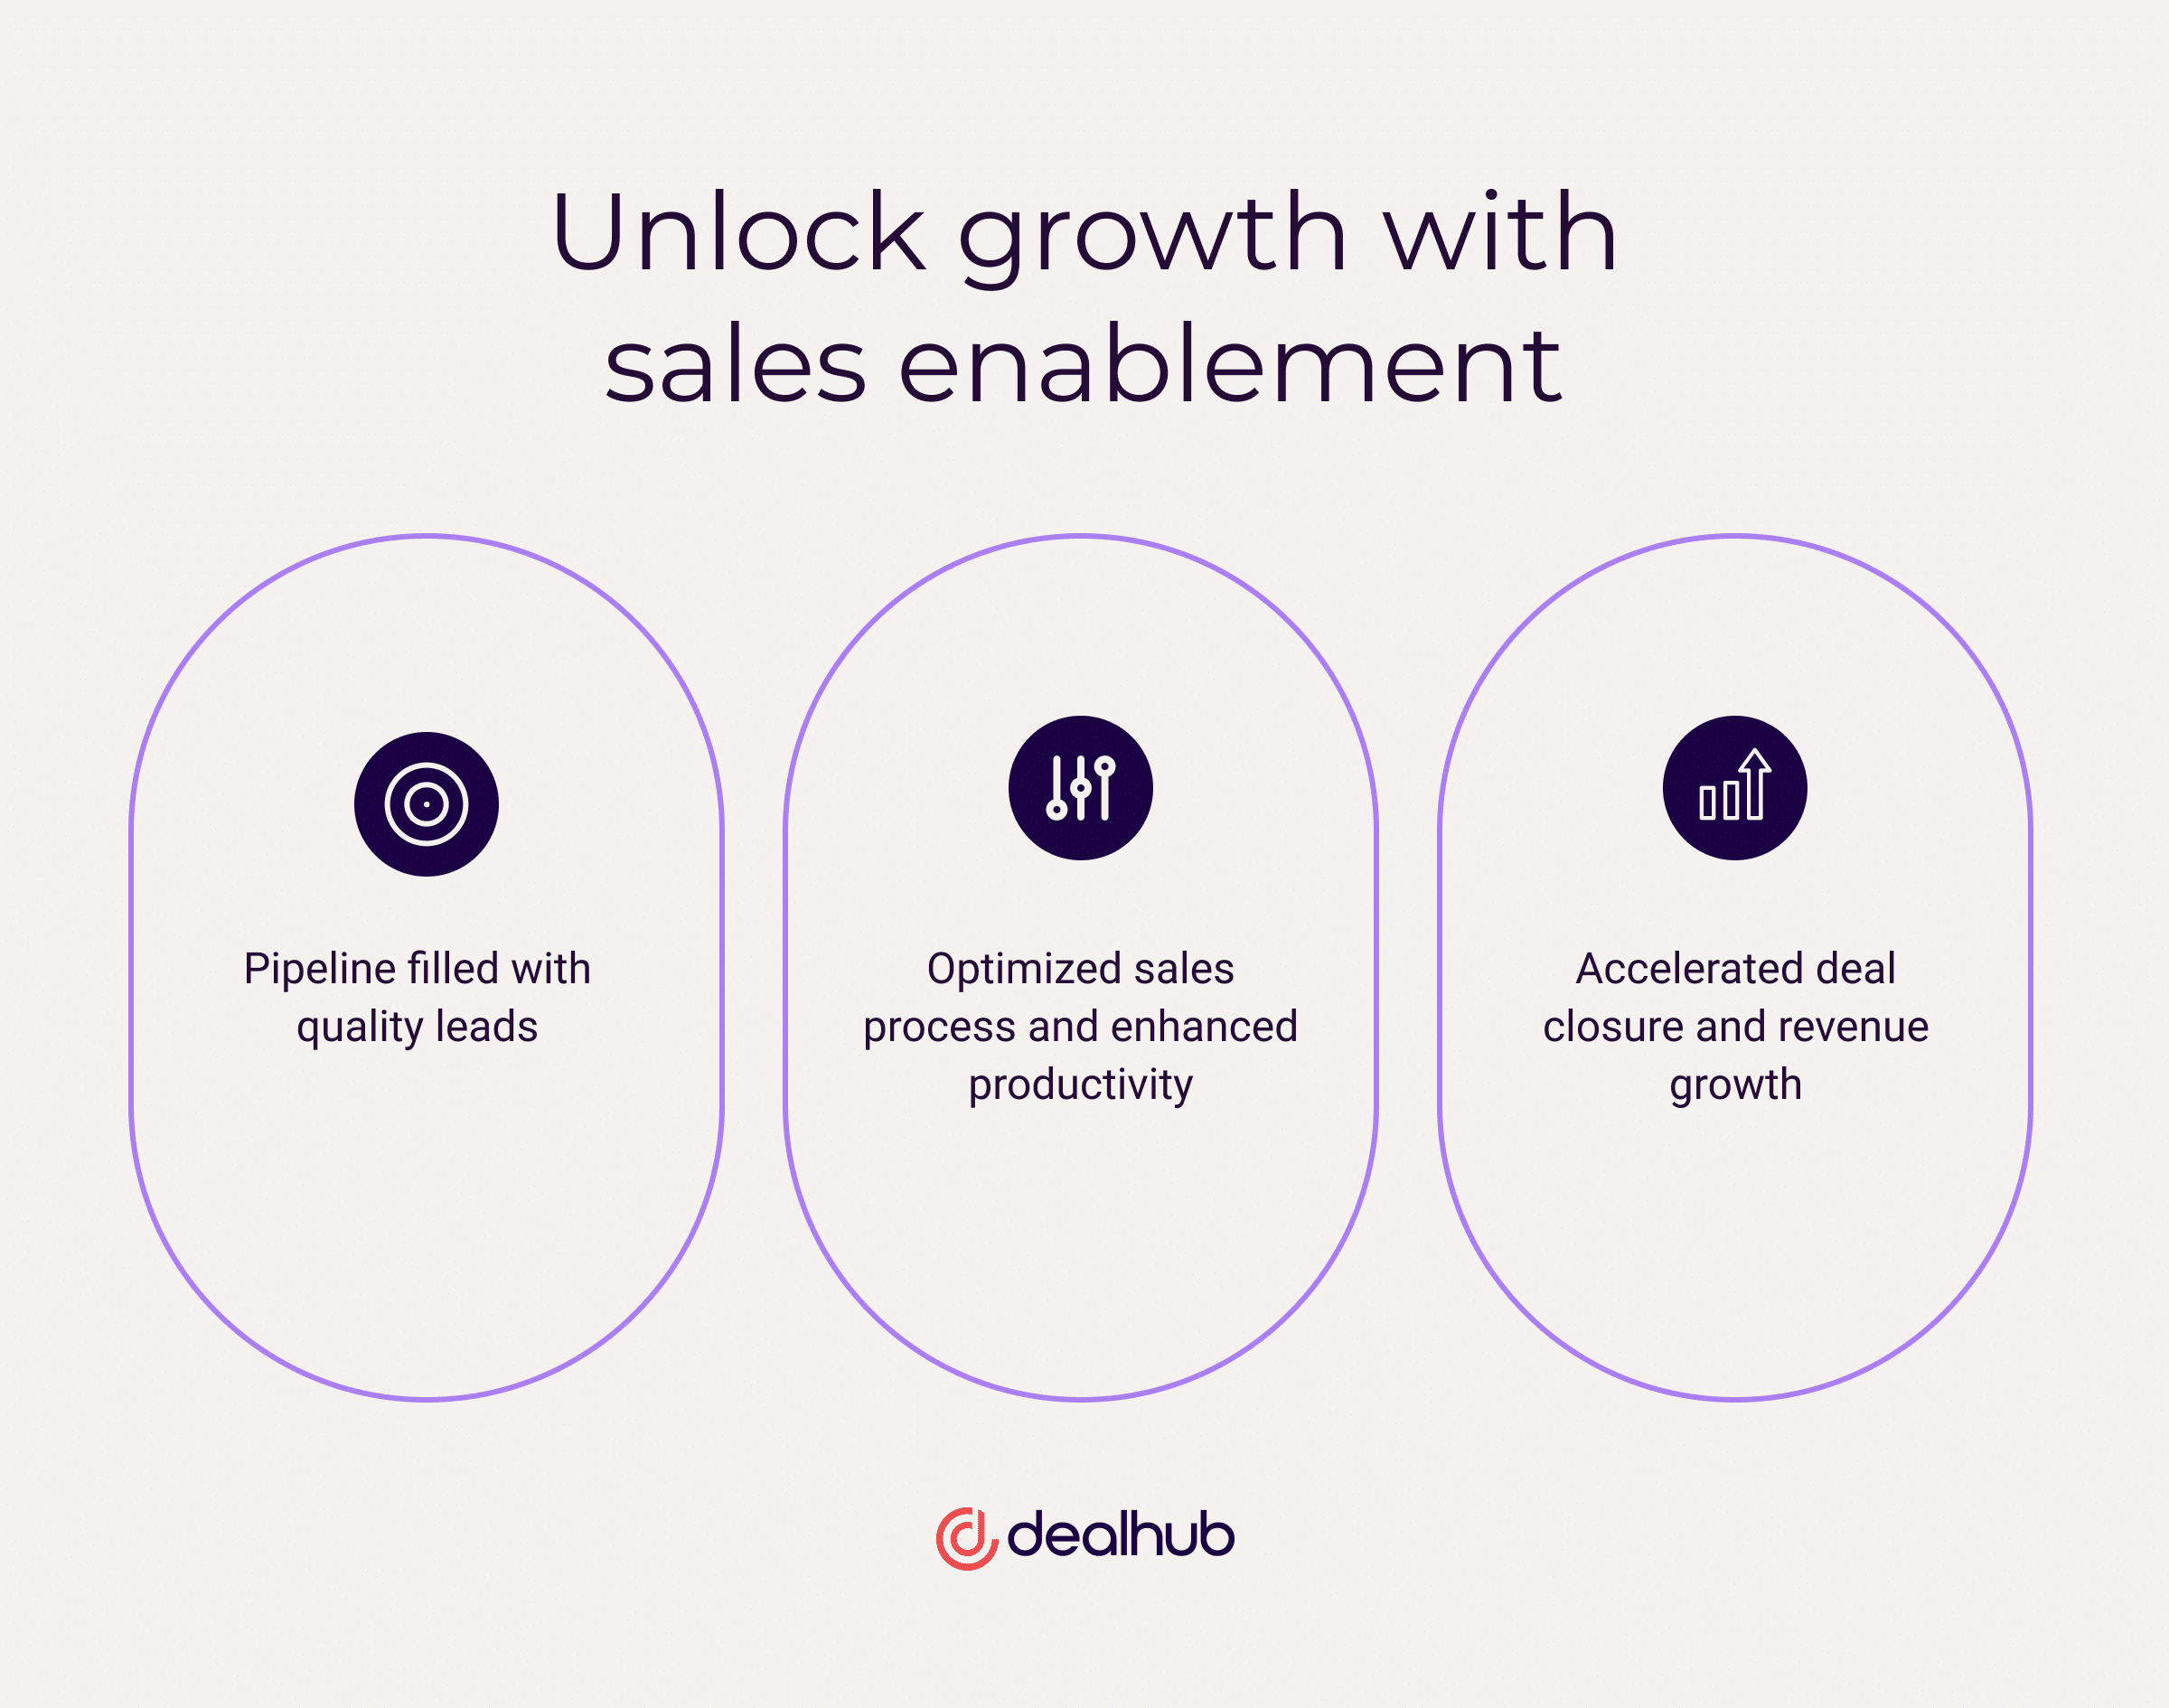 Sales enablement is essential to revenue growth